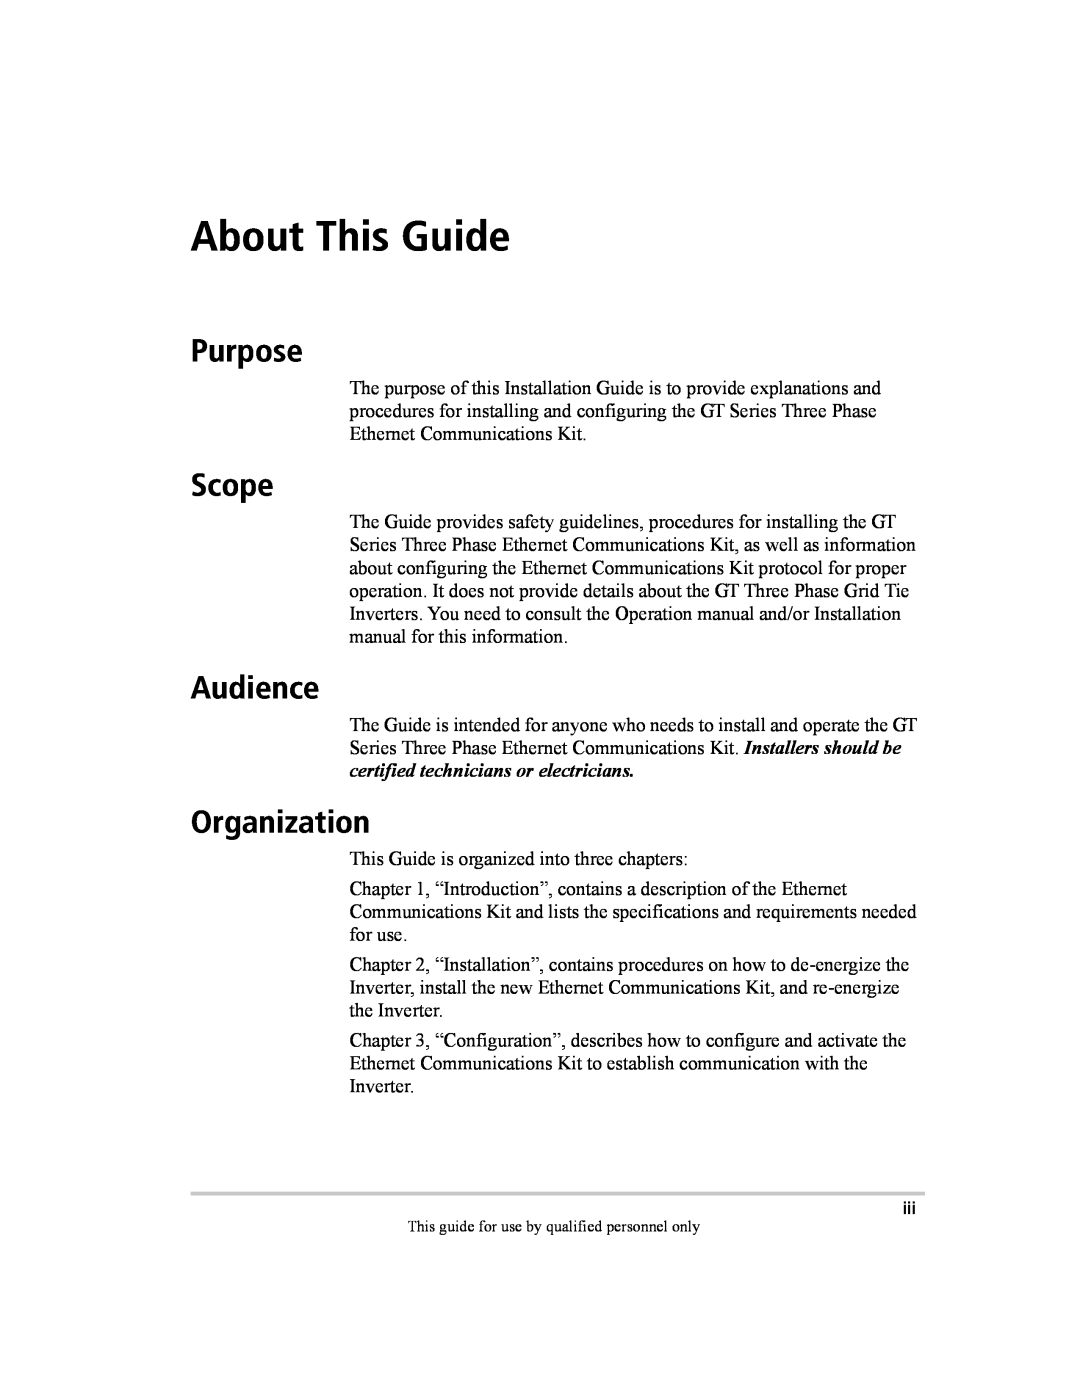 Xantrex Technology GT Series manual About This Guide, Purpose, Scope, Audience, Organization 